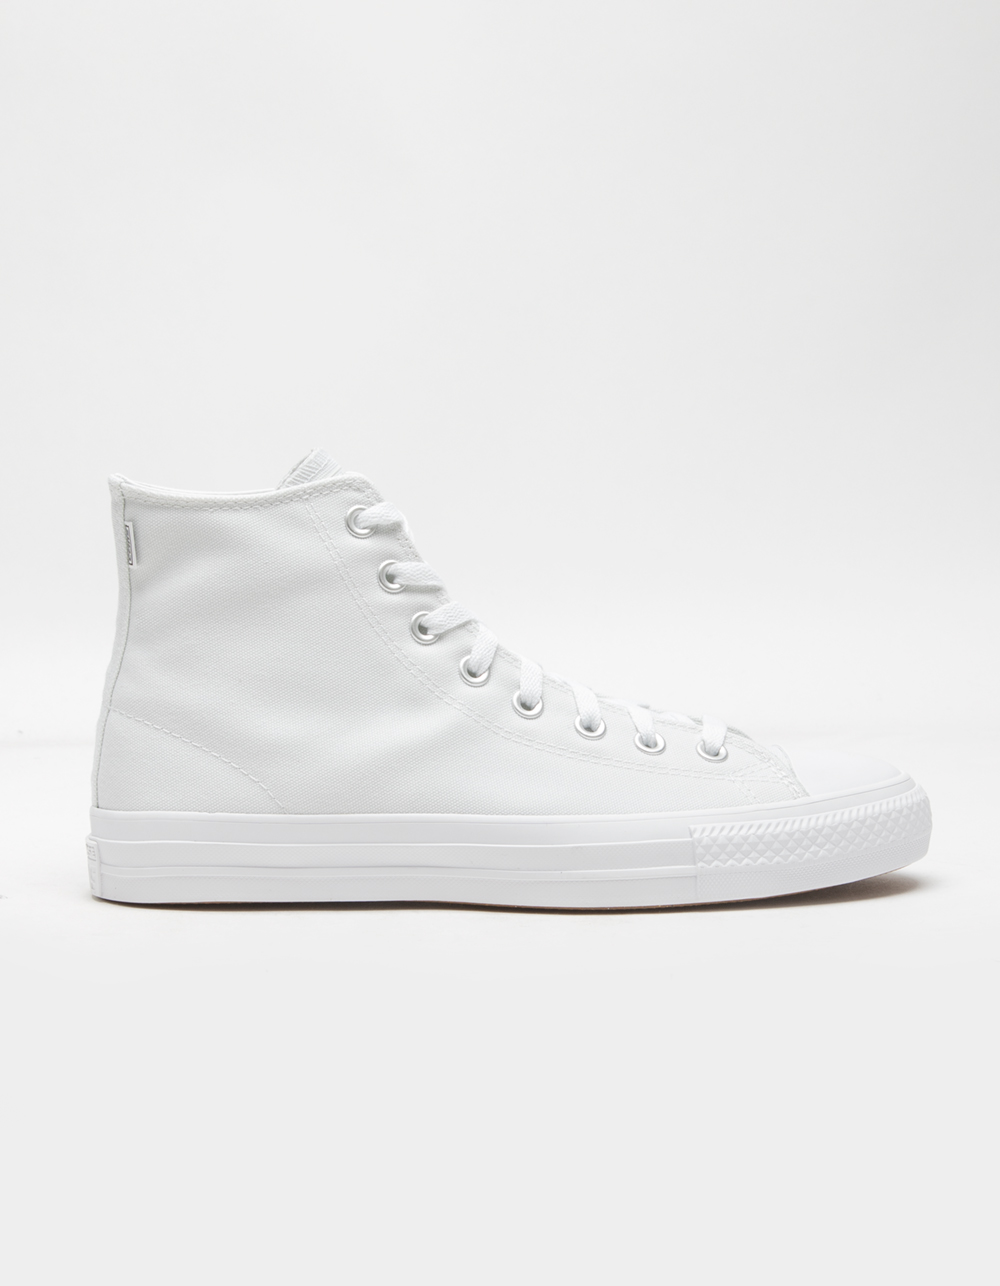 CONVERSE Chuck Taylor All Star Pro Shoes - WHITE | Tillys